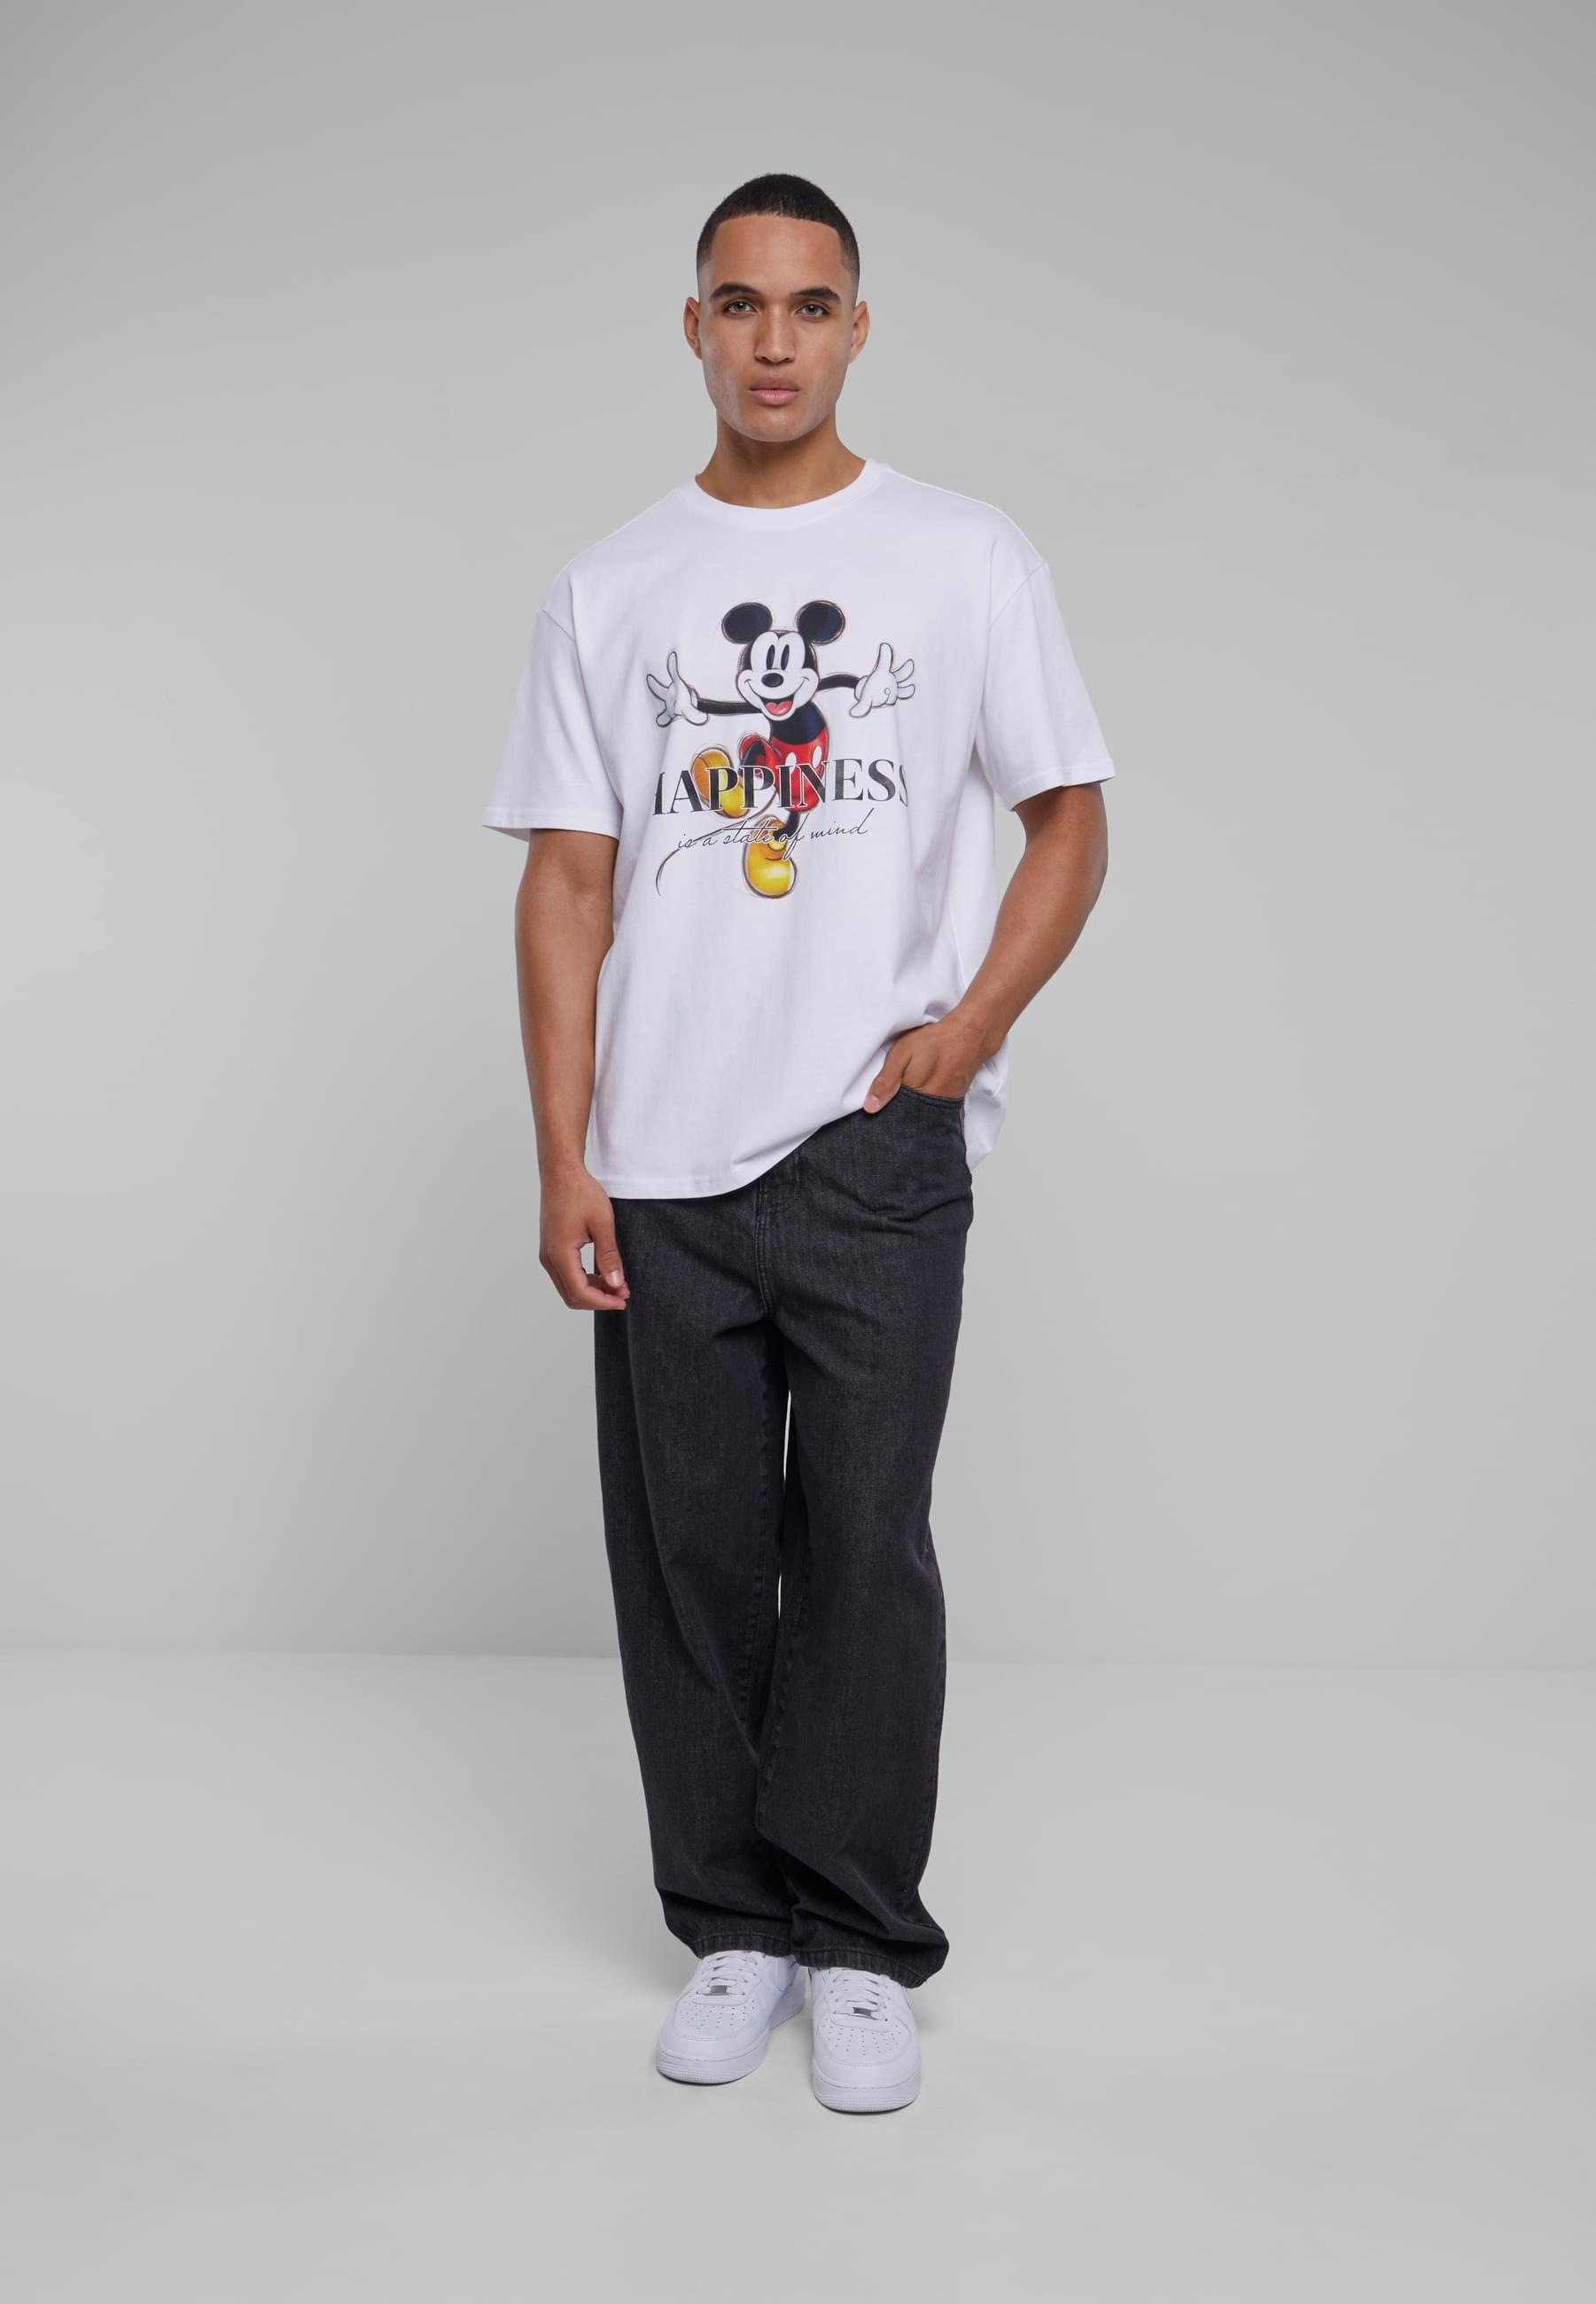 Upscale by Mister Tee T-Shirt »Unisex Disney 100 Mickey Happiness Oversize  Tee«, (1 tlg.) online kaufen | BAUR